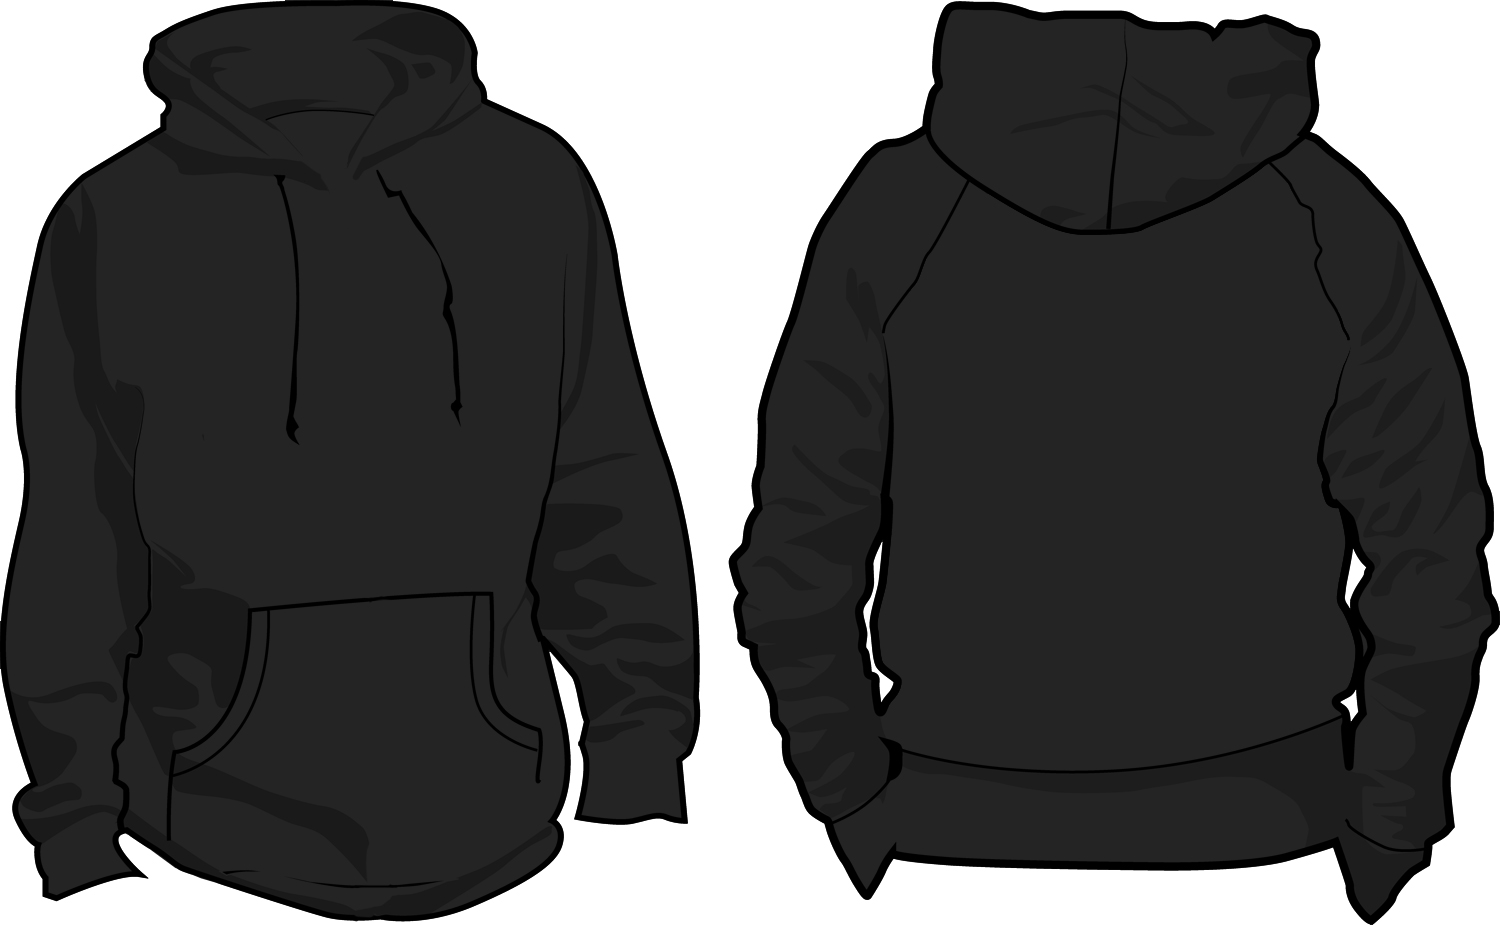 Free Hoodie Cliparts, Download Free Clip Art, Free Clip Art